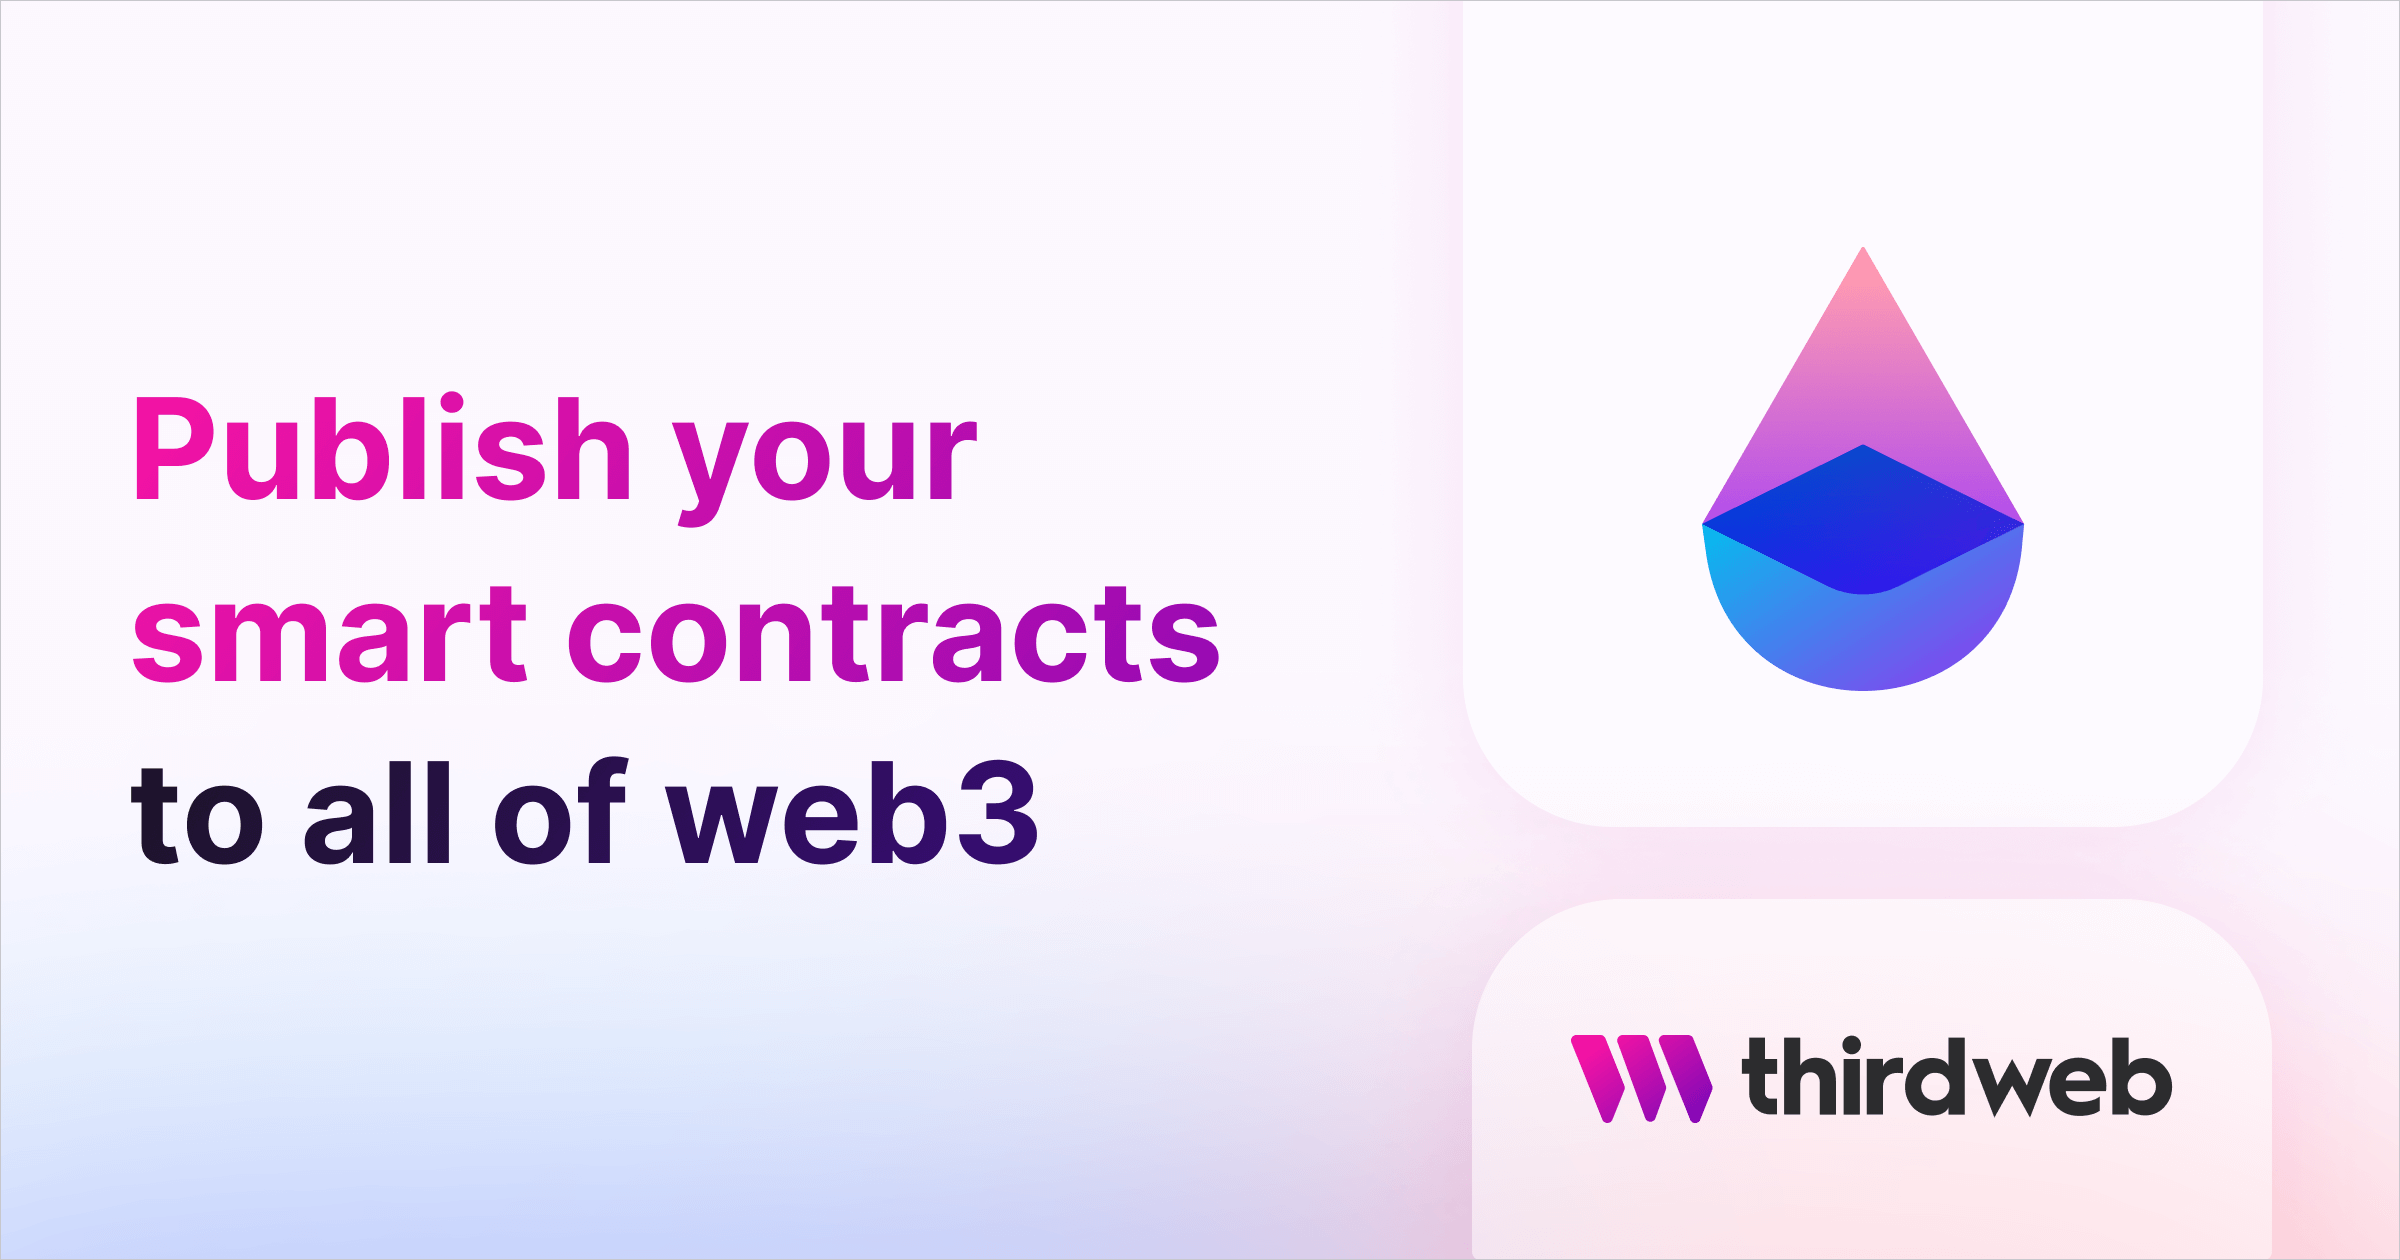 Share your smart contracts with thirdweb Publish